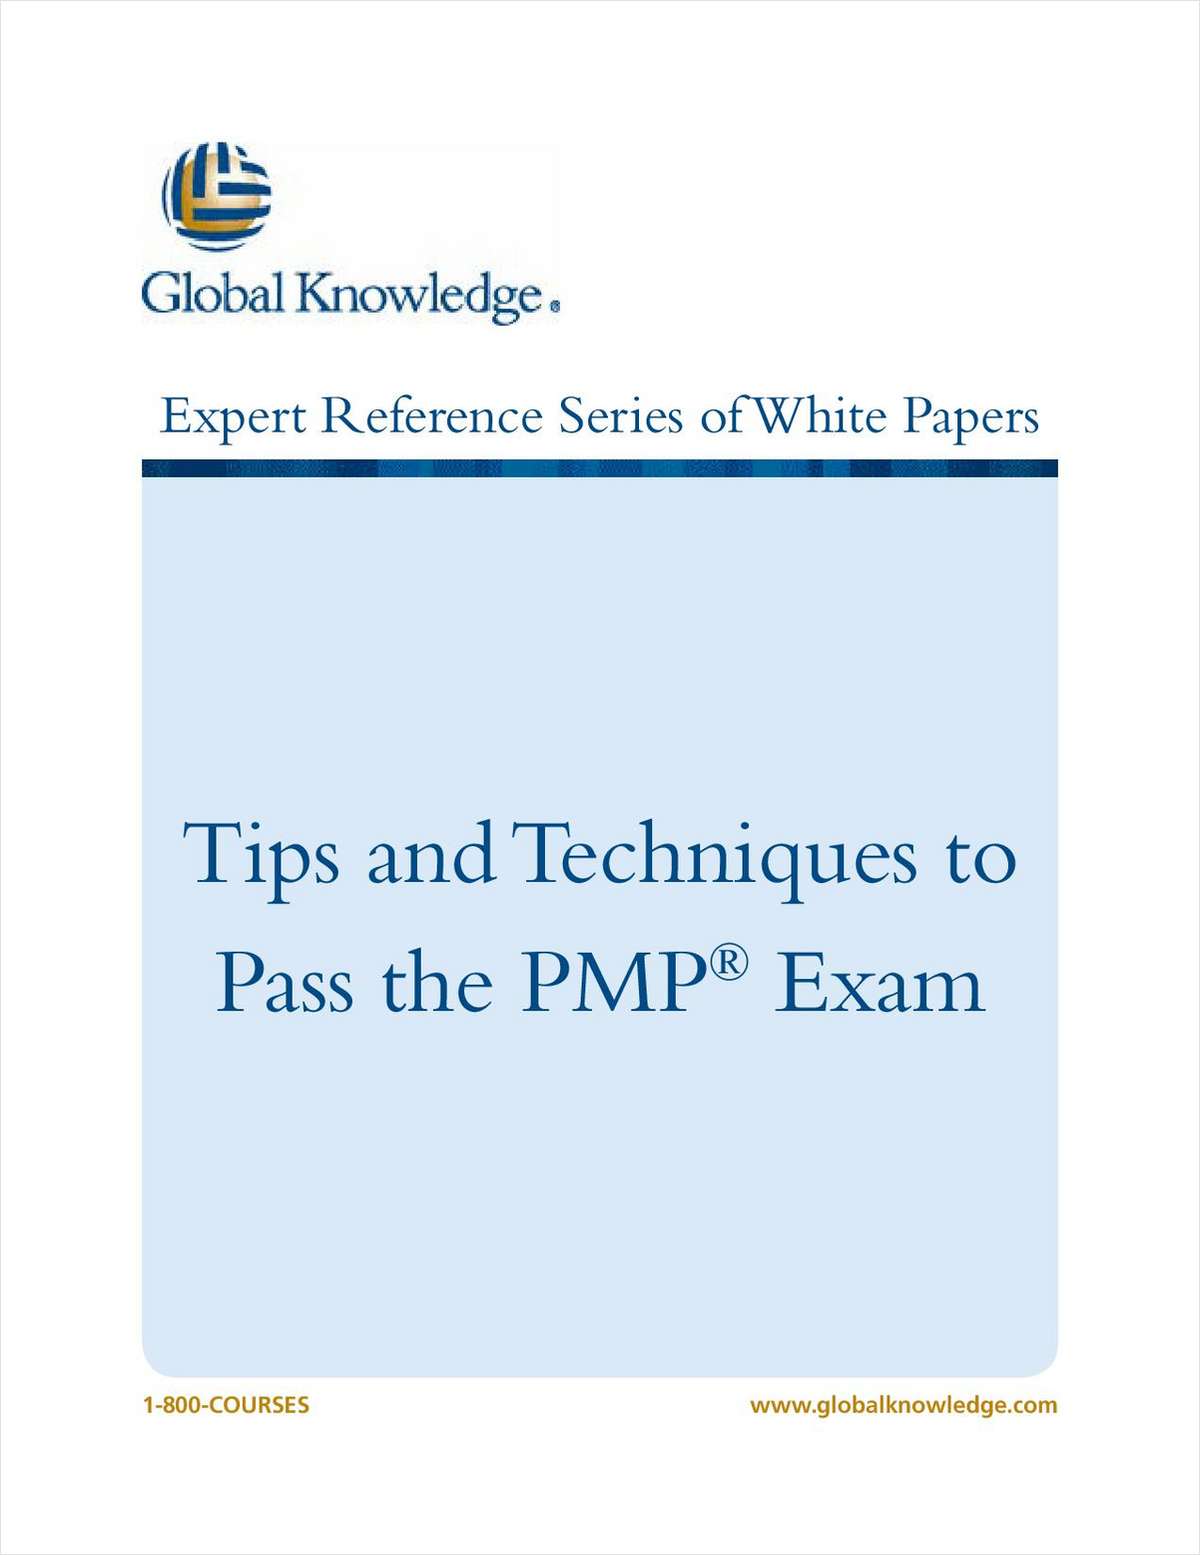 Tips and Techniques to Pass the PMP® Exam